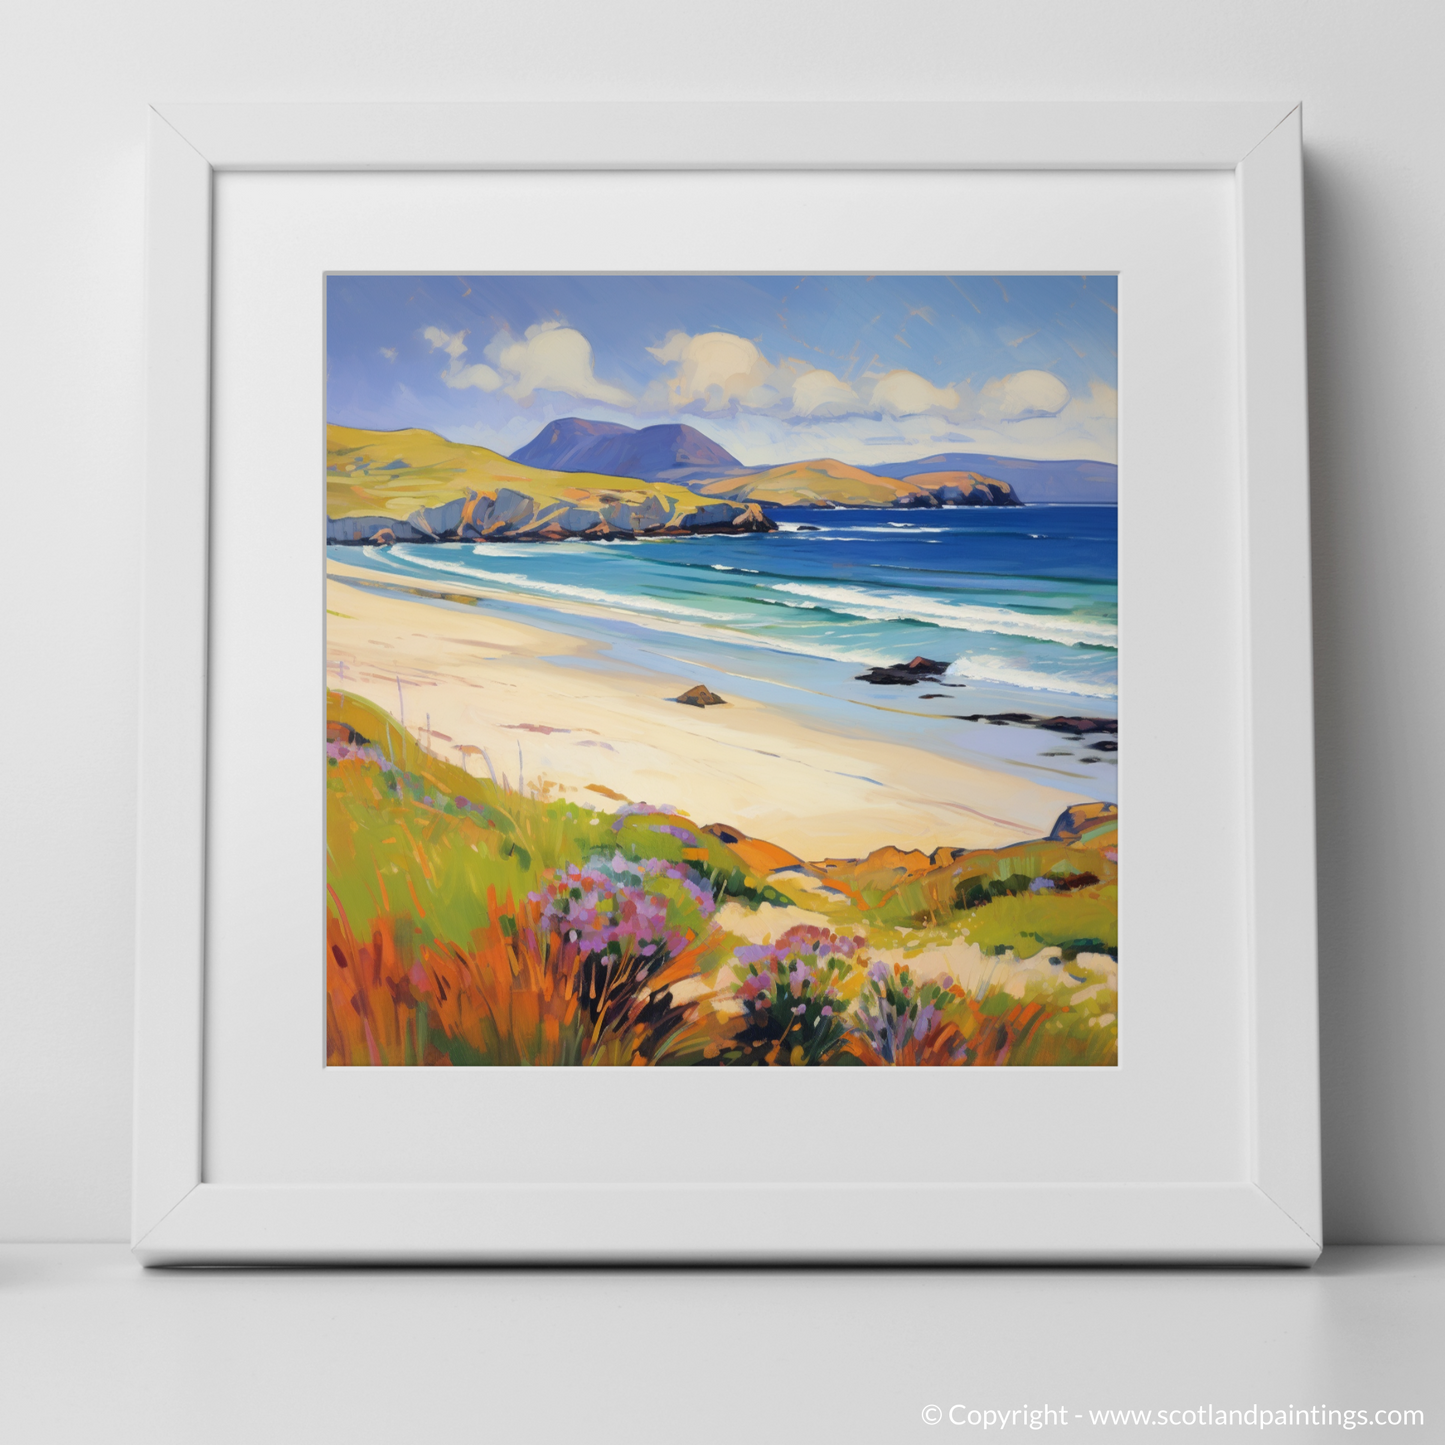 Art Print of Sandwood Bay, Sutherland in summer with a white frame